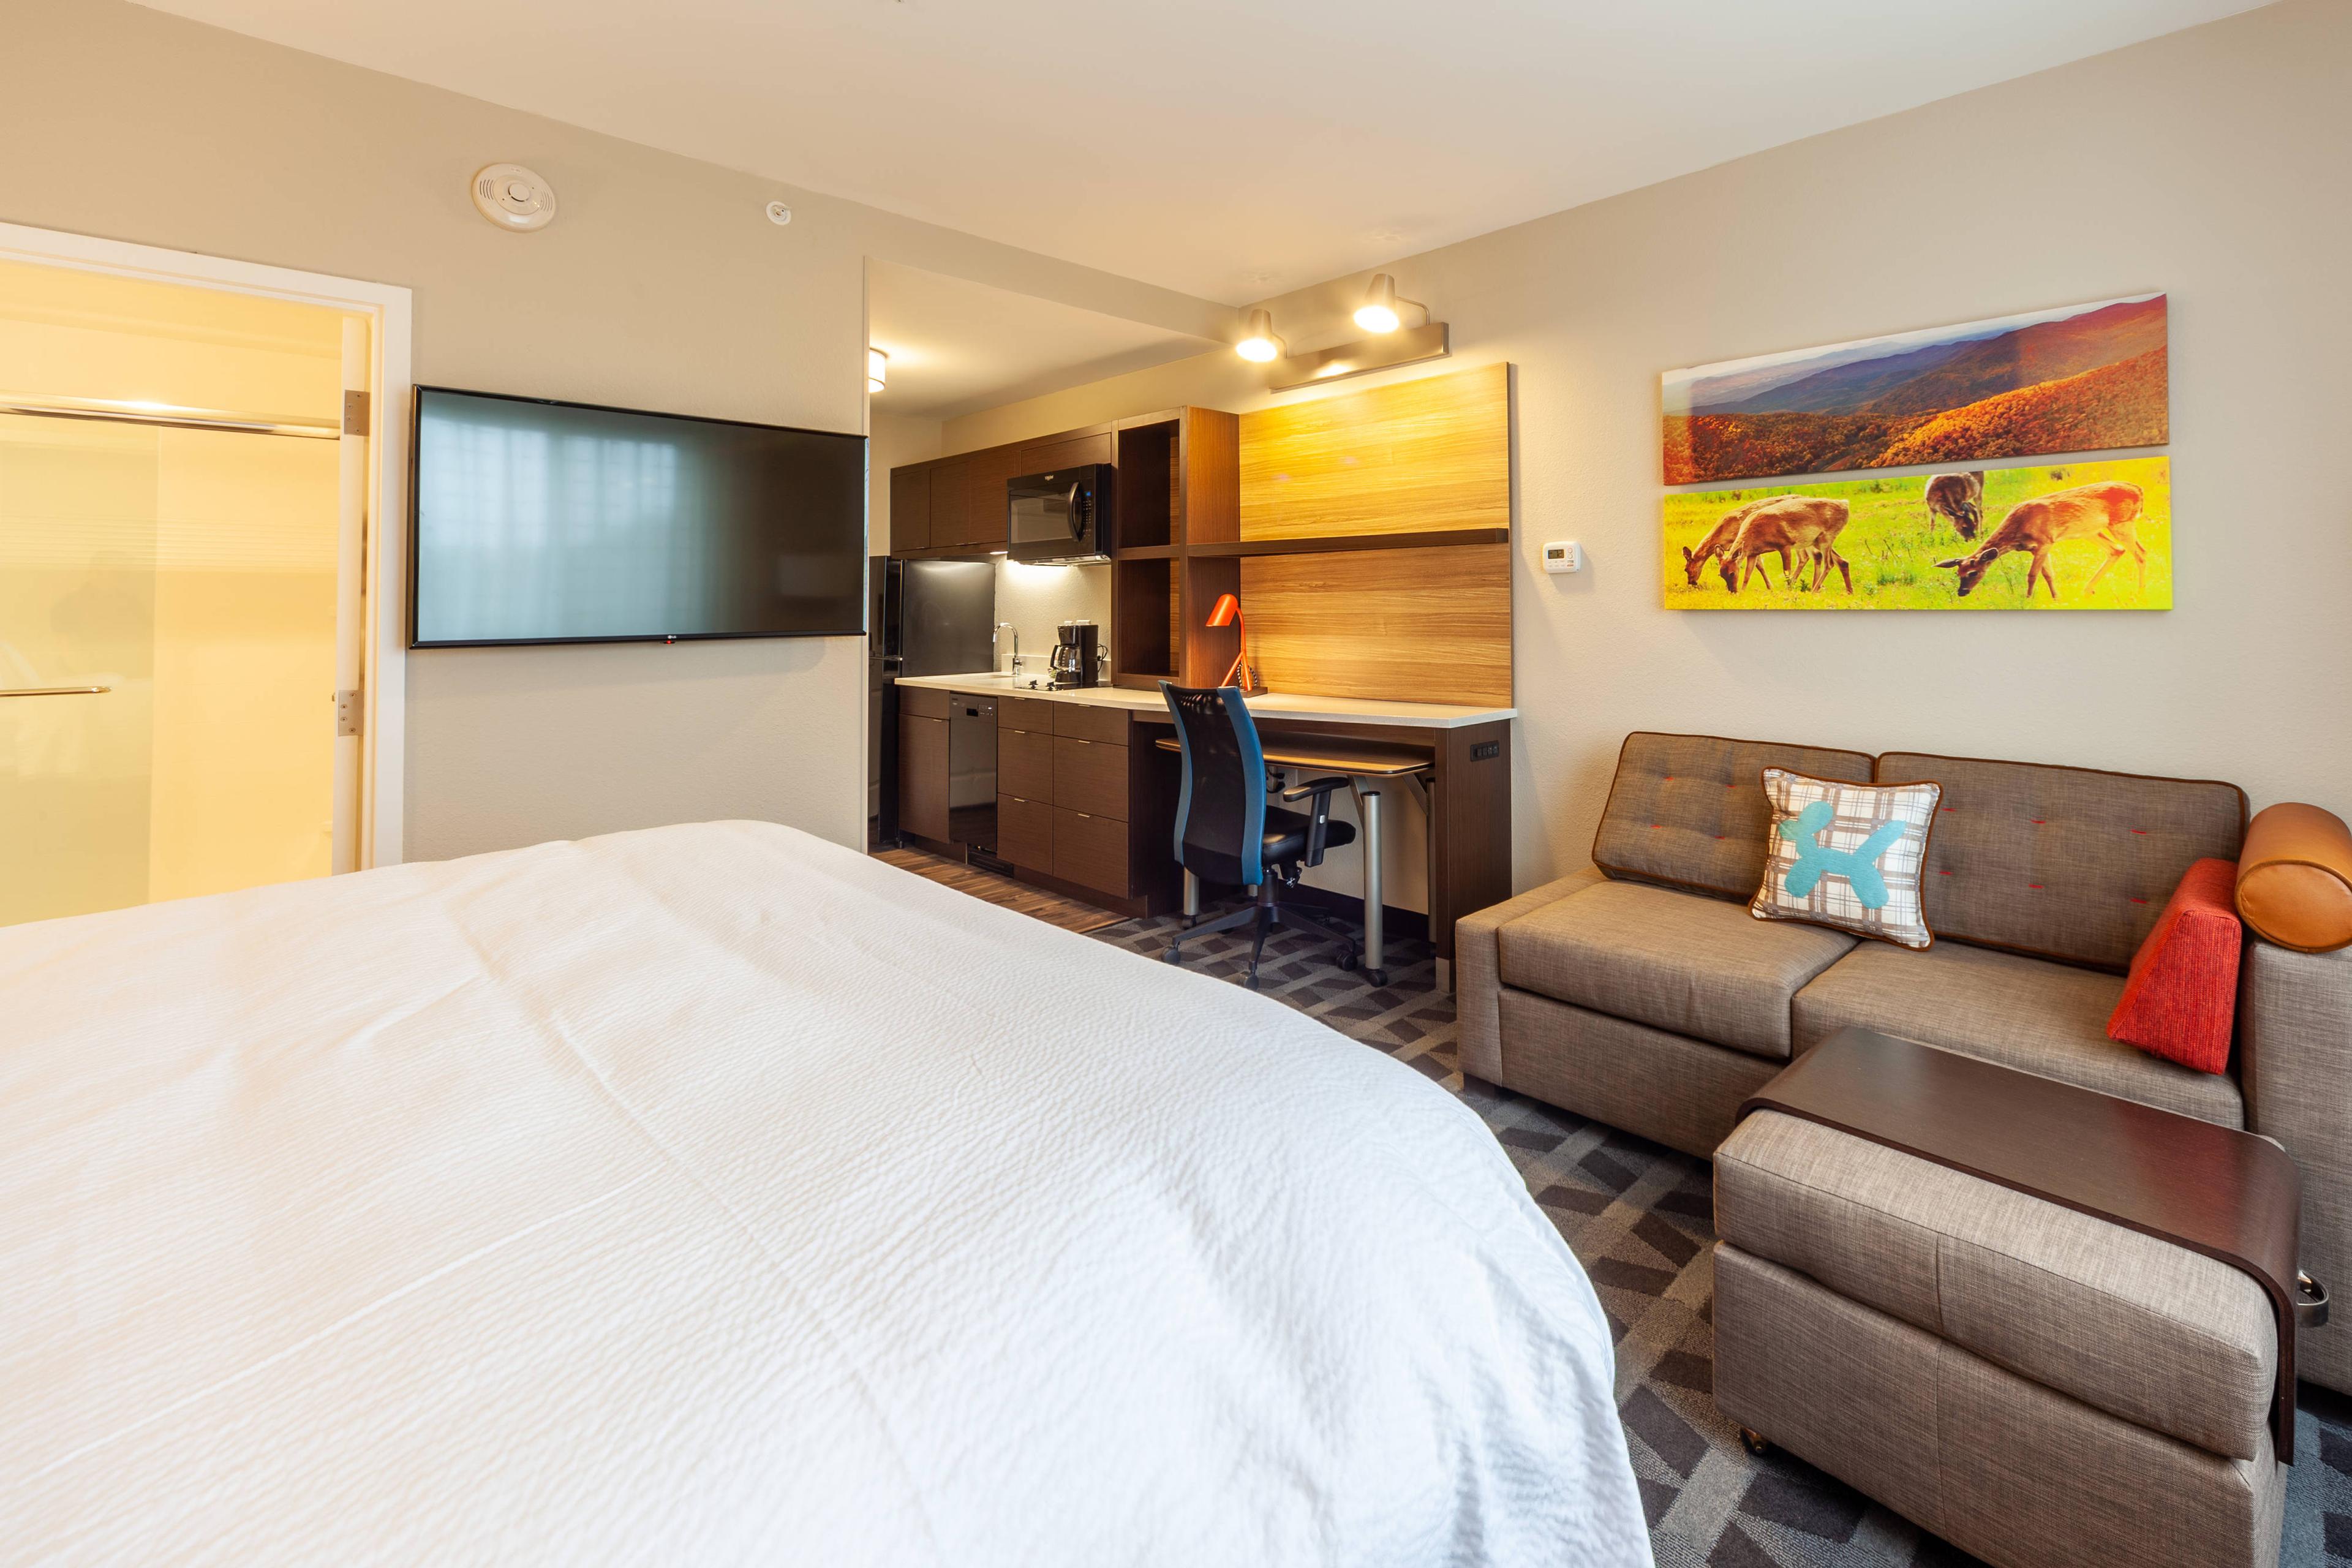 Our king studio suite offers a large open floor plan and is equipped with a 49-inch flat-screen TV, fully equipped kitchen, and pull-out sofa bed.